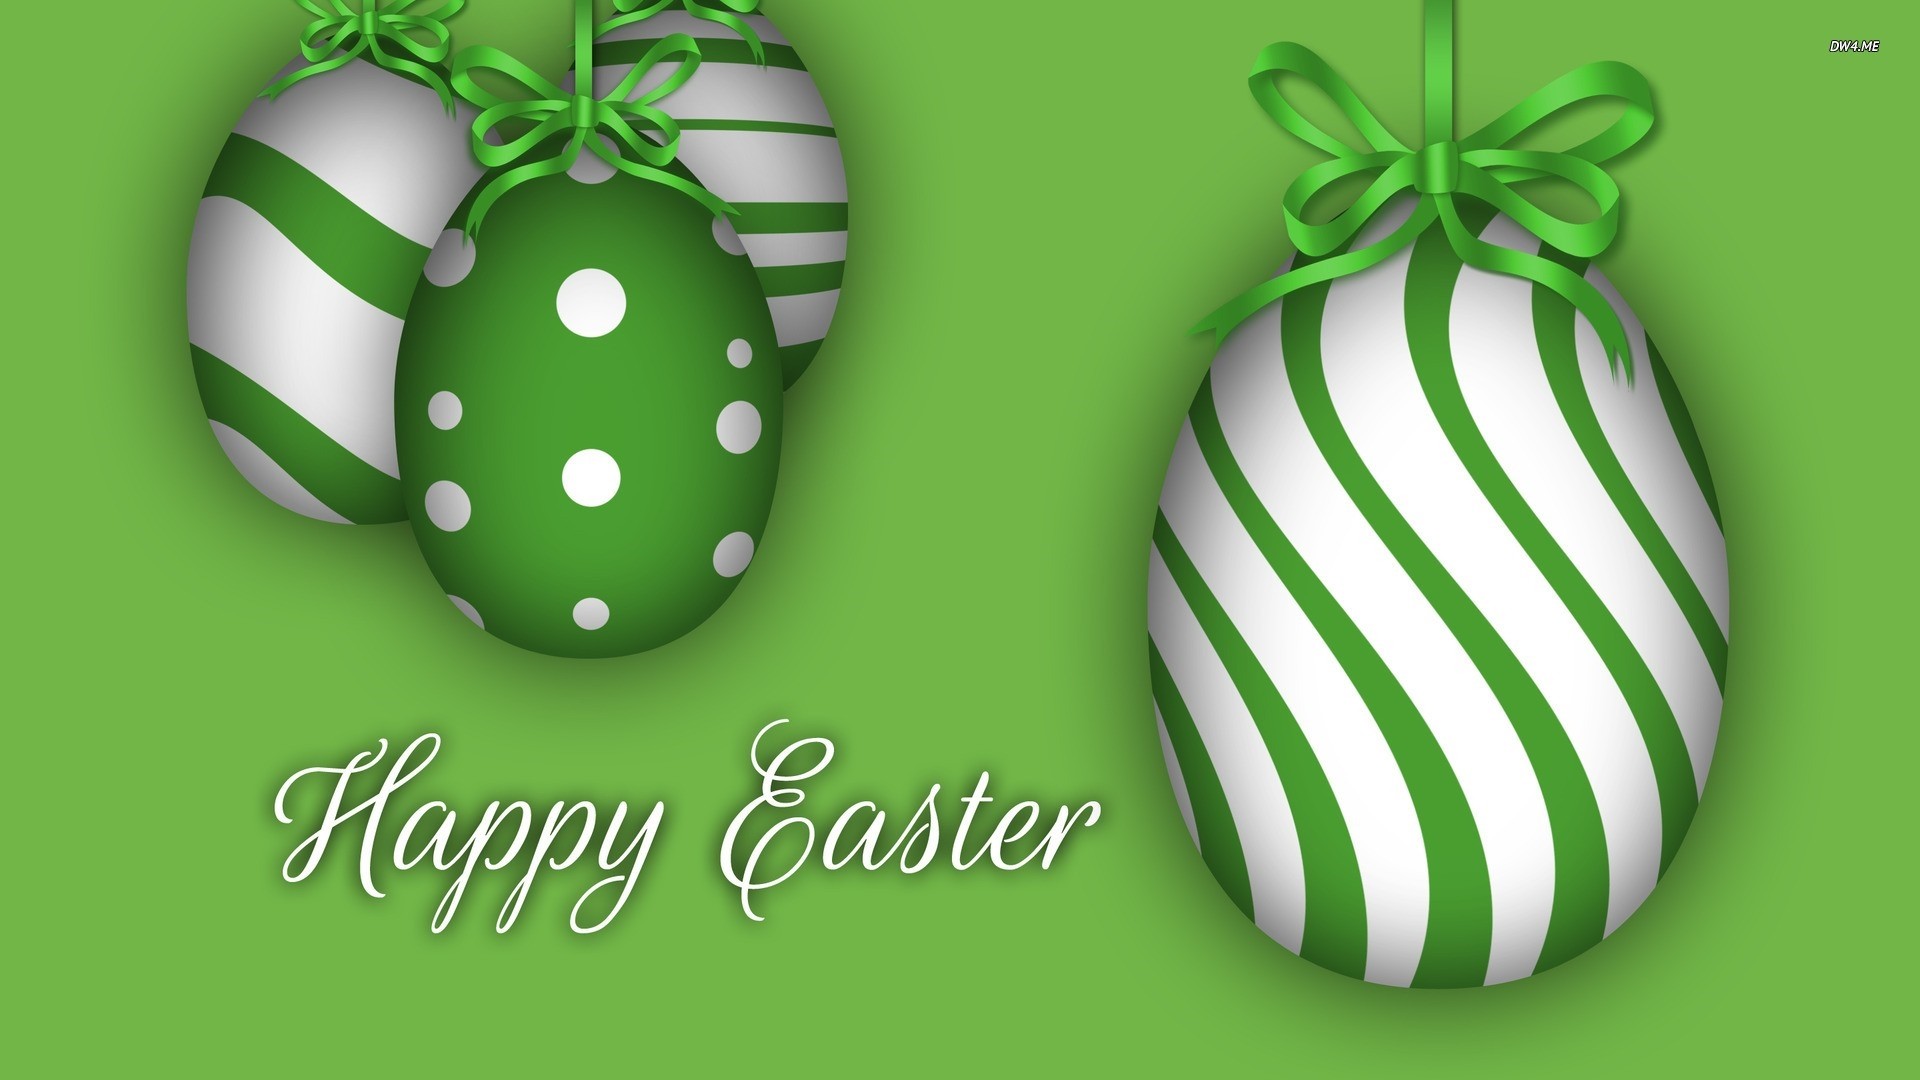 Happy Easter Image Download Full